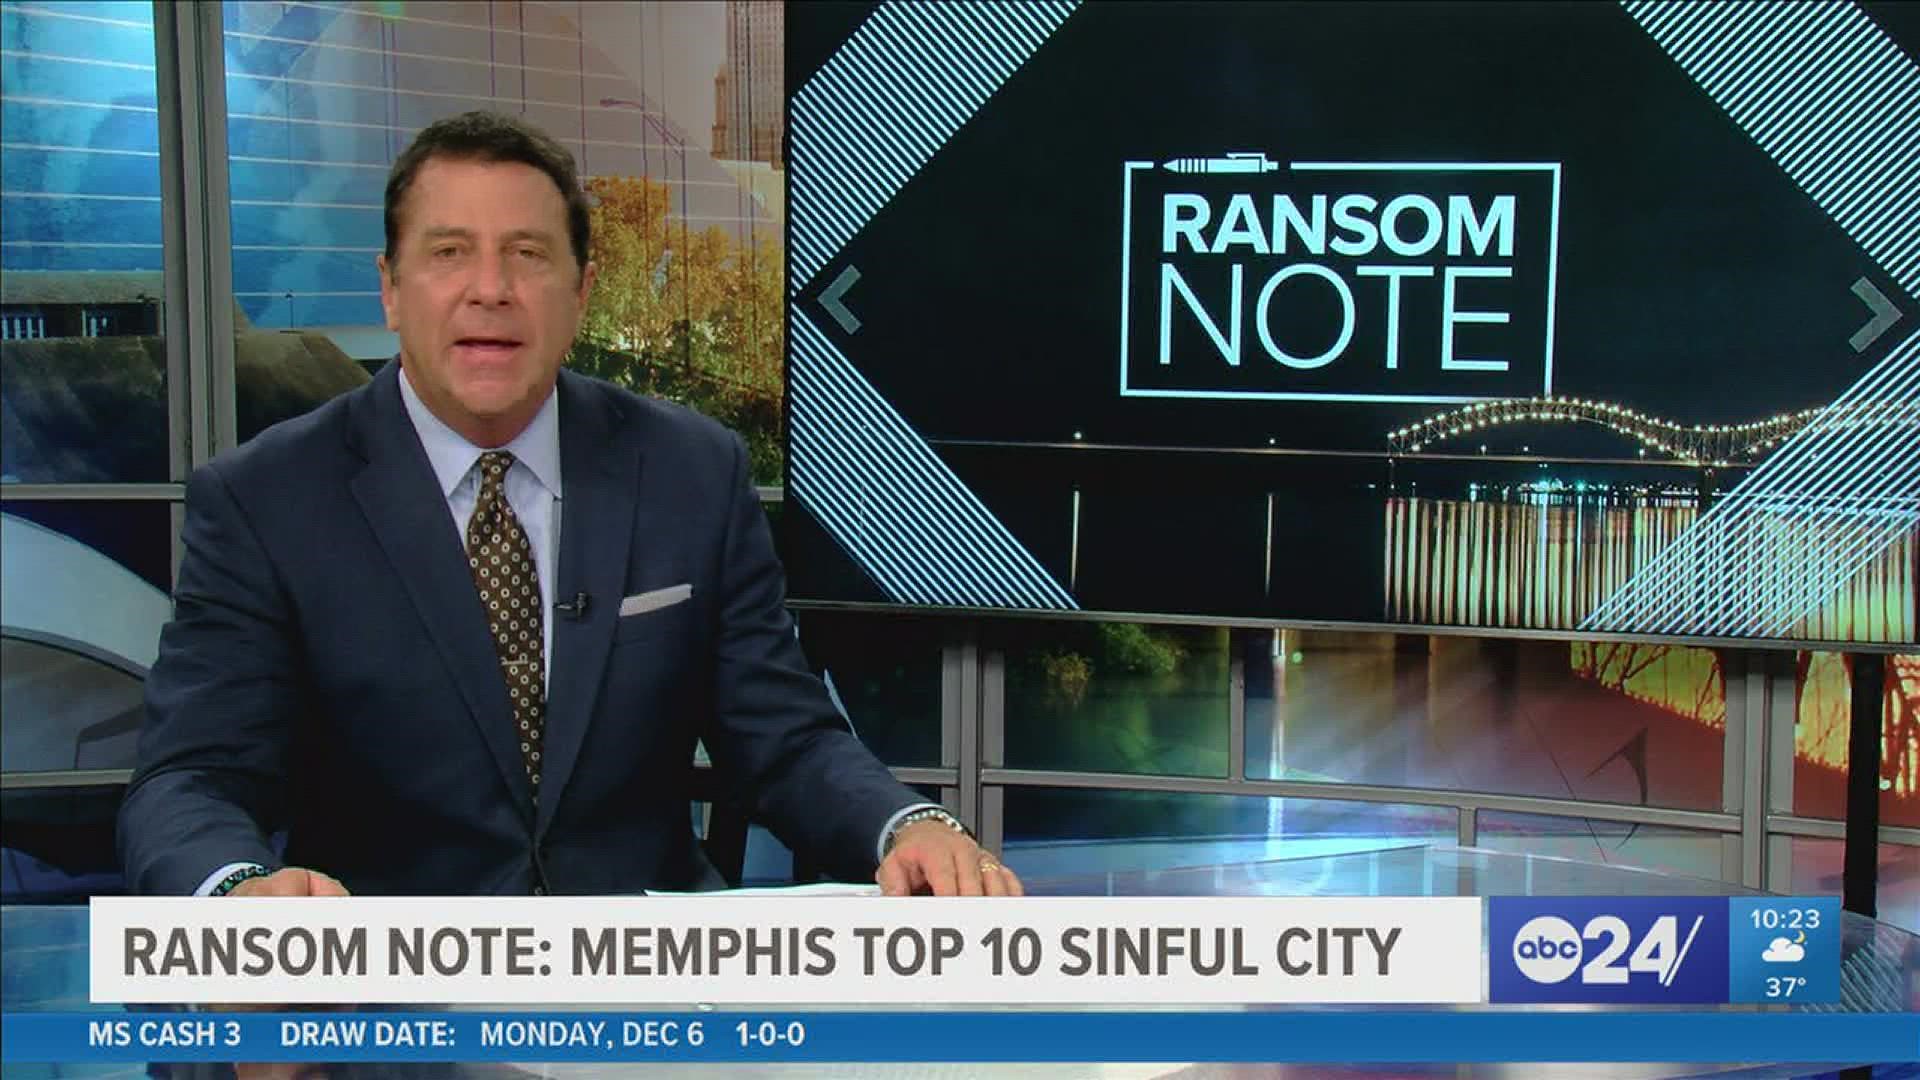 ABC24 Anchor Richard Ransom discusses in his Ransom Note about WalletHub's new study of the nation's most sinful cities.